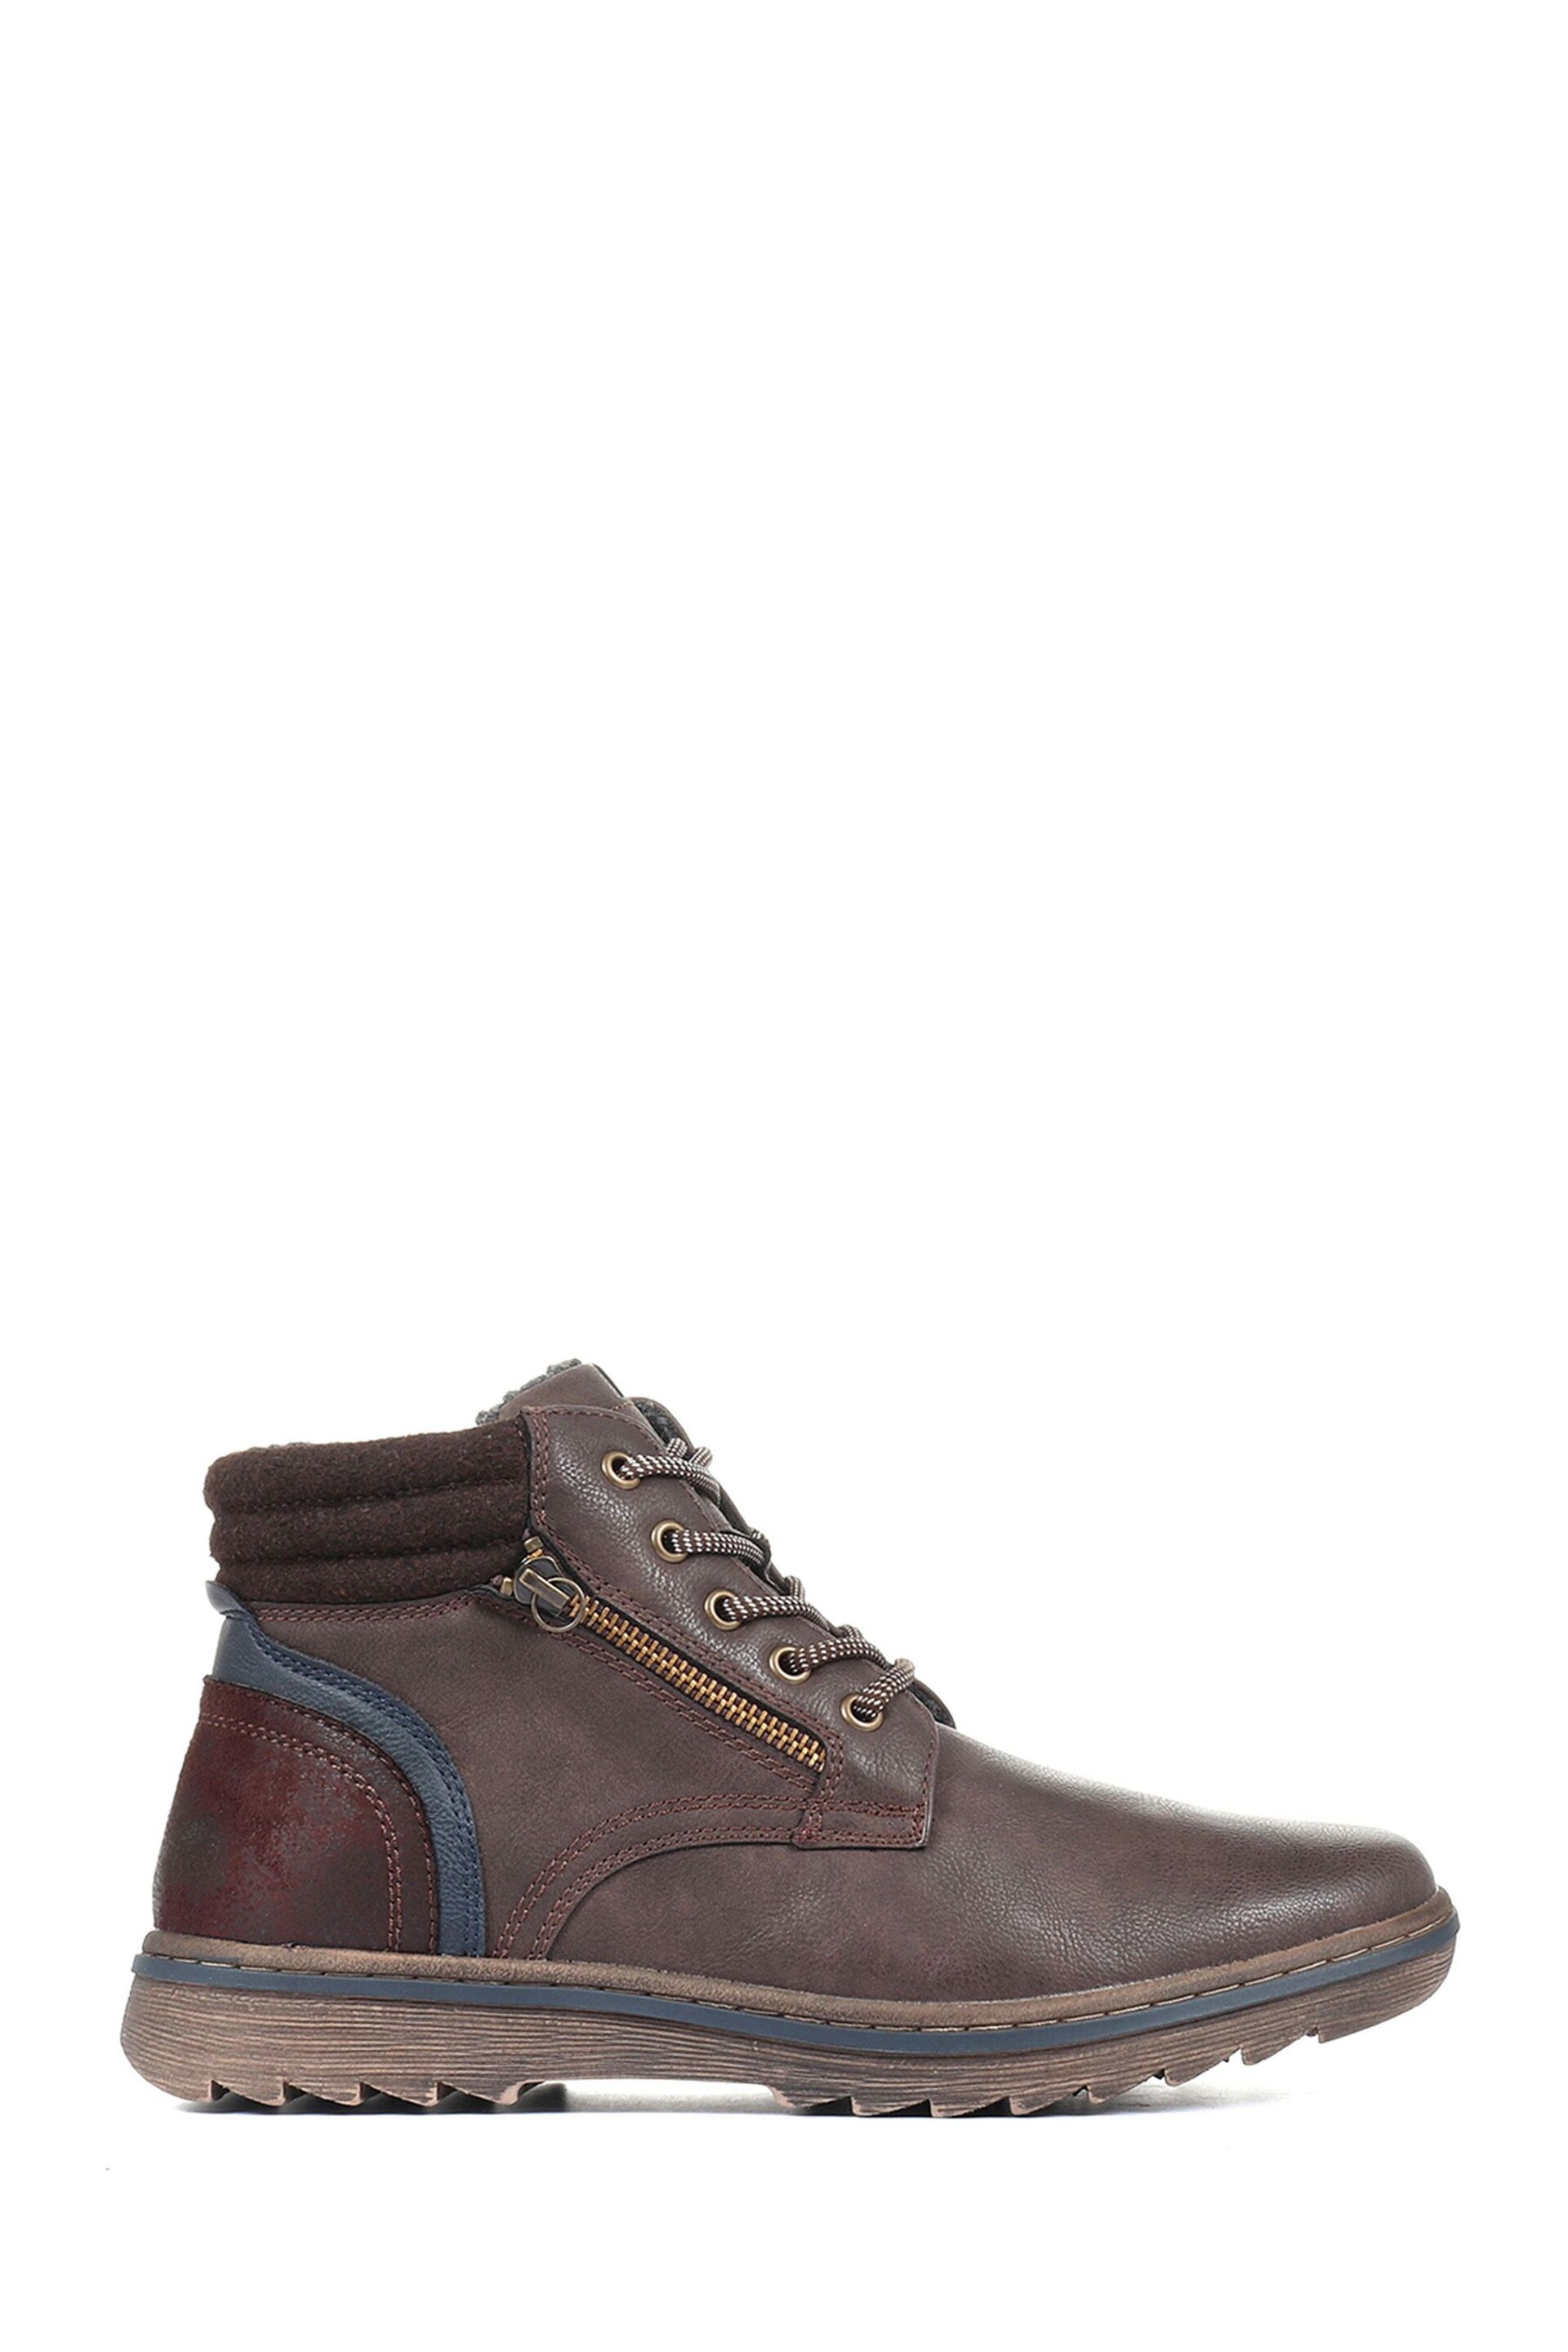 Pavers Brown Lace-Up Ankle Boots - Image 1 of 5